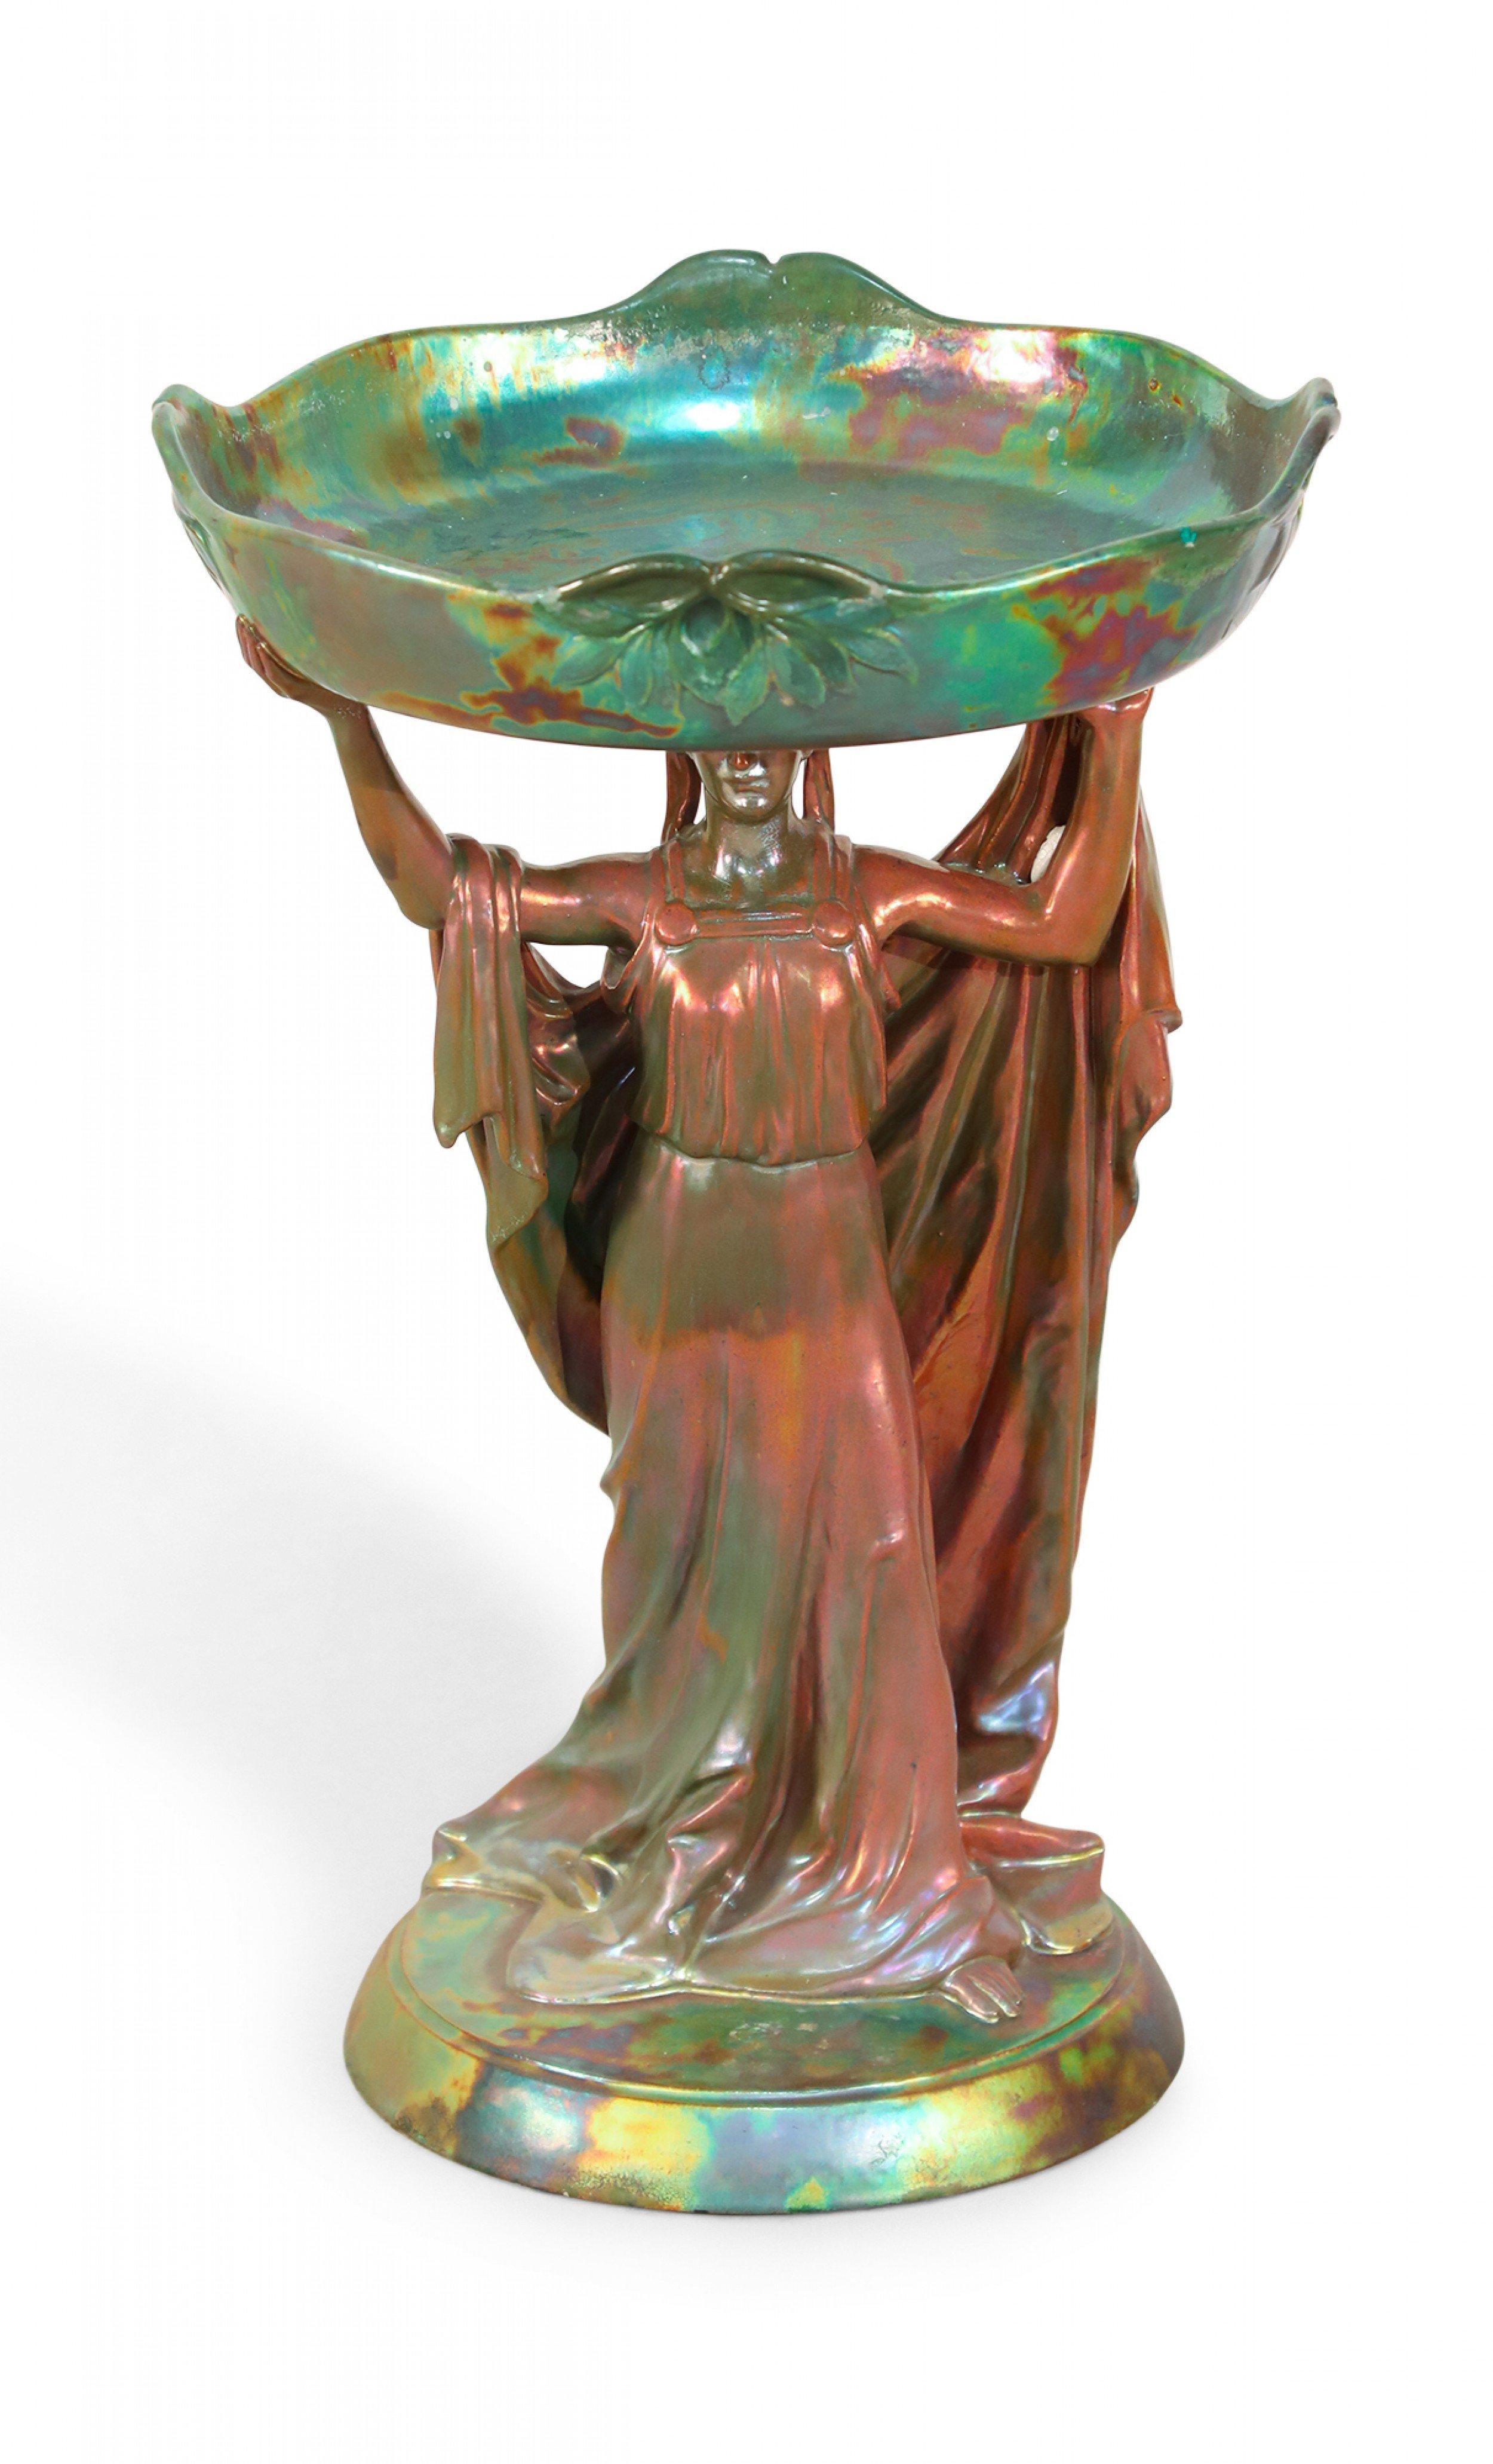 Art Nouveau Zsolnay porcelain green iridescent centerpiece with female figure holding round tray above head.
